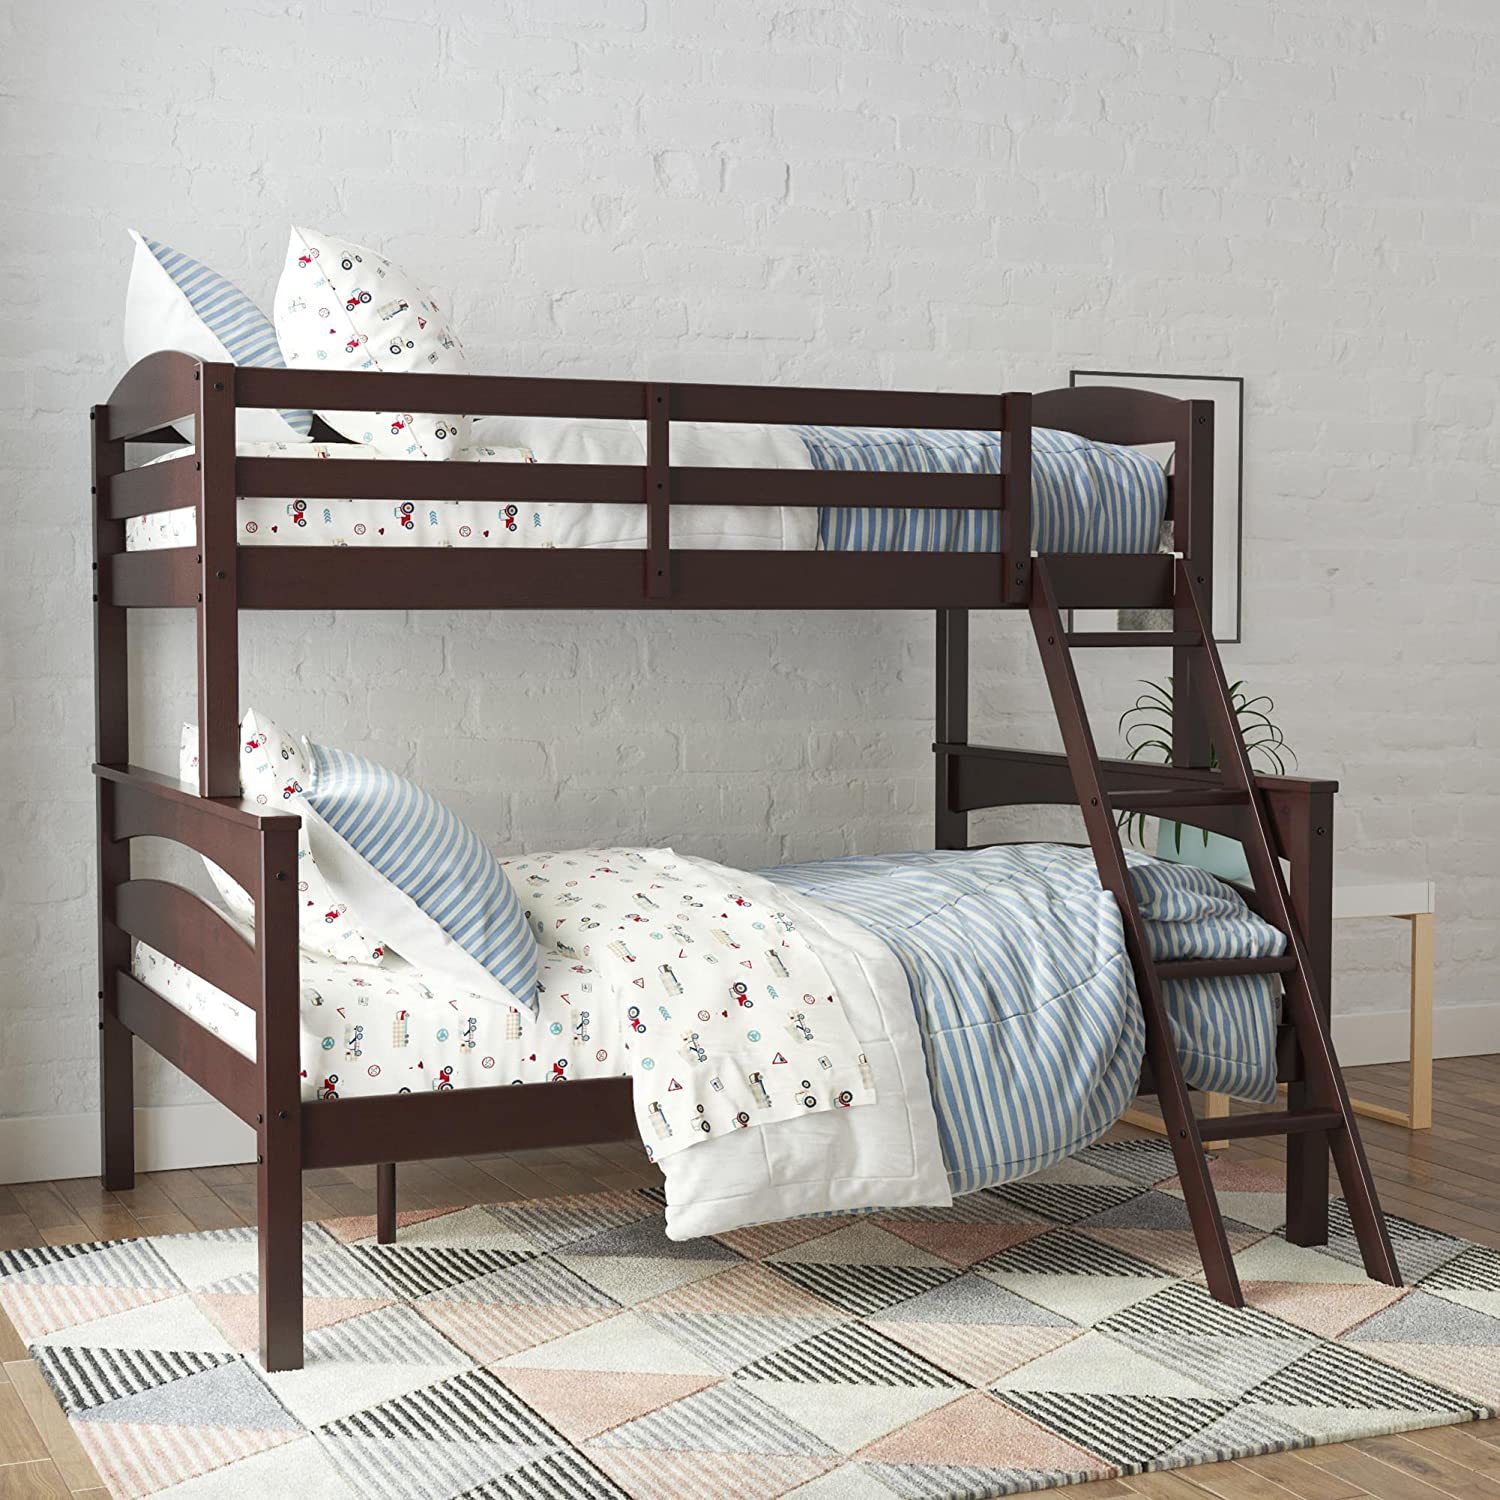 Dorel Living Brady Solid Wood Bunk Beds Twin Over Full with Ladder and Guard - $386.99